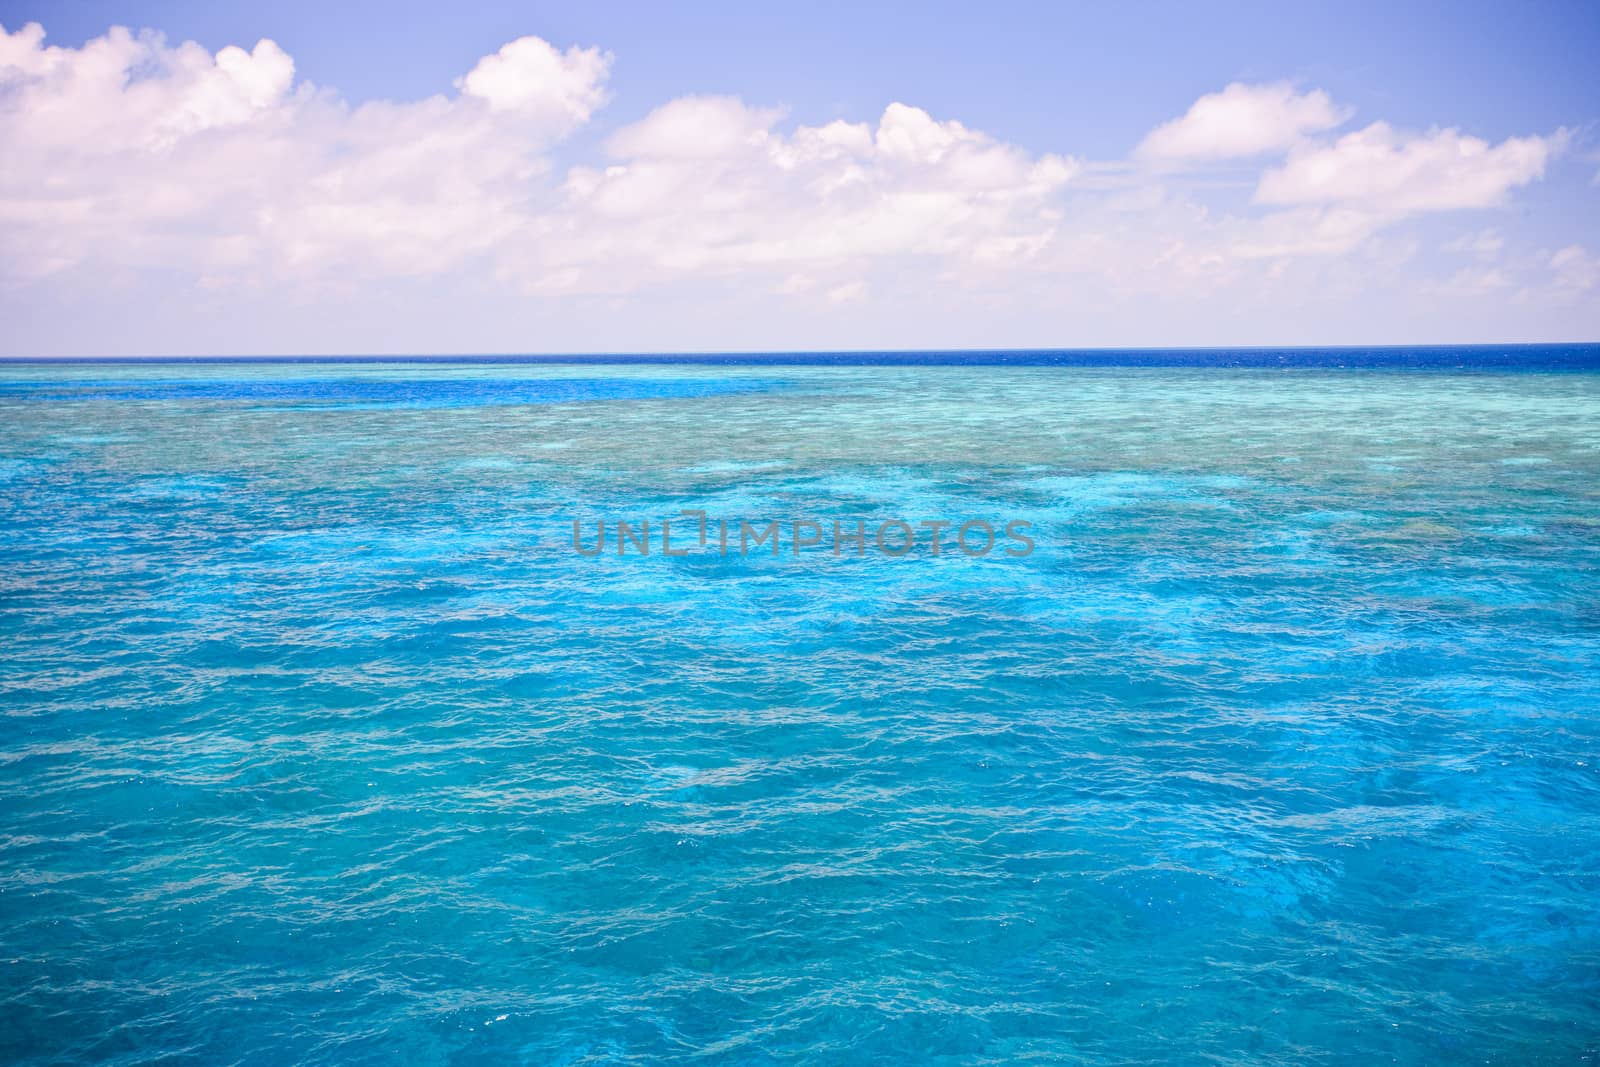 Background image of an azure blue ocean with shallow submerged offshore reef under a cloudy blue summer sky